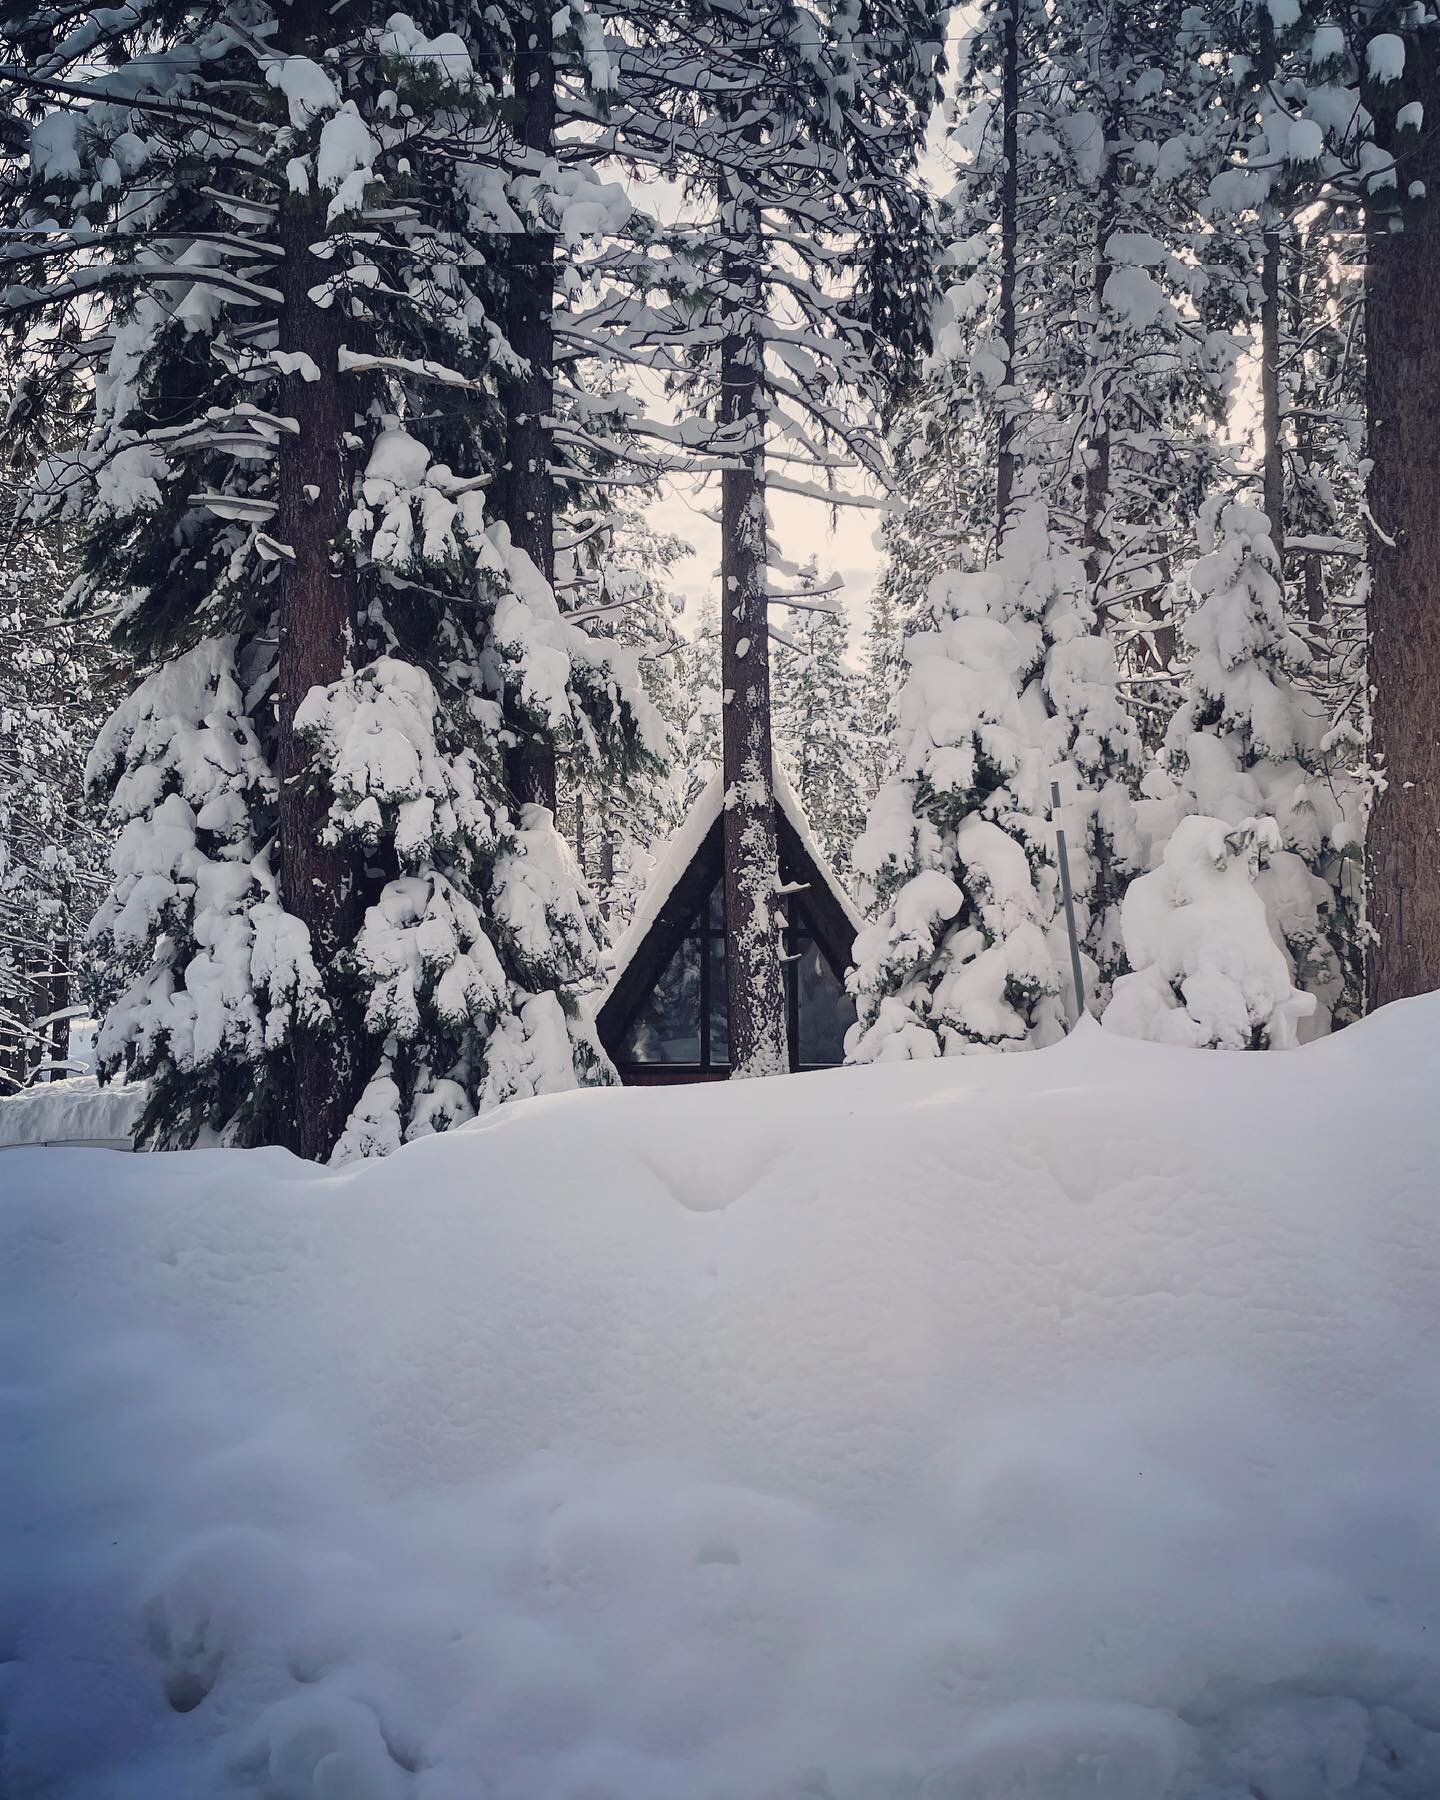 All tucked in and looking pretty 🤩 

Our calendars are OPEN and there&rsquo;s one week left in January 24-28.  February - April are already filling FAST&hellip;and with a base like this, it looks like Spring Skiing is ON! 

#tahoe #cabininthesnow #a